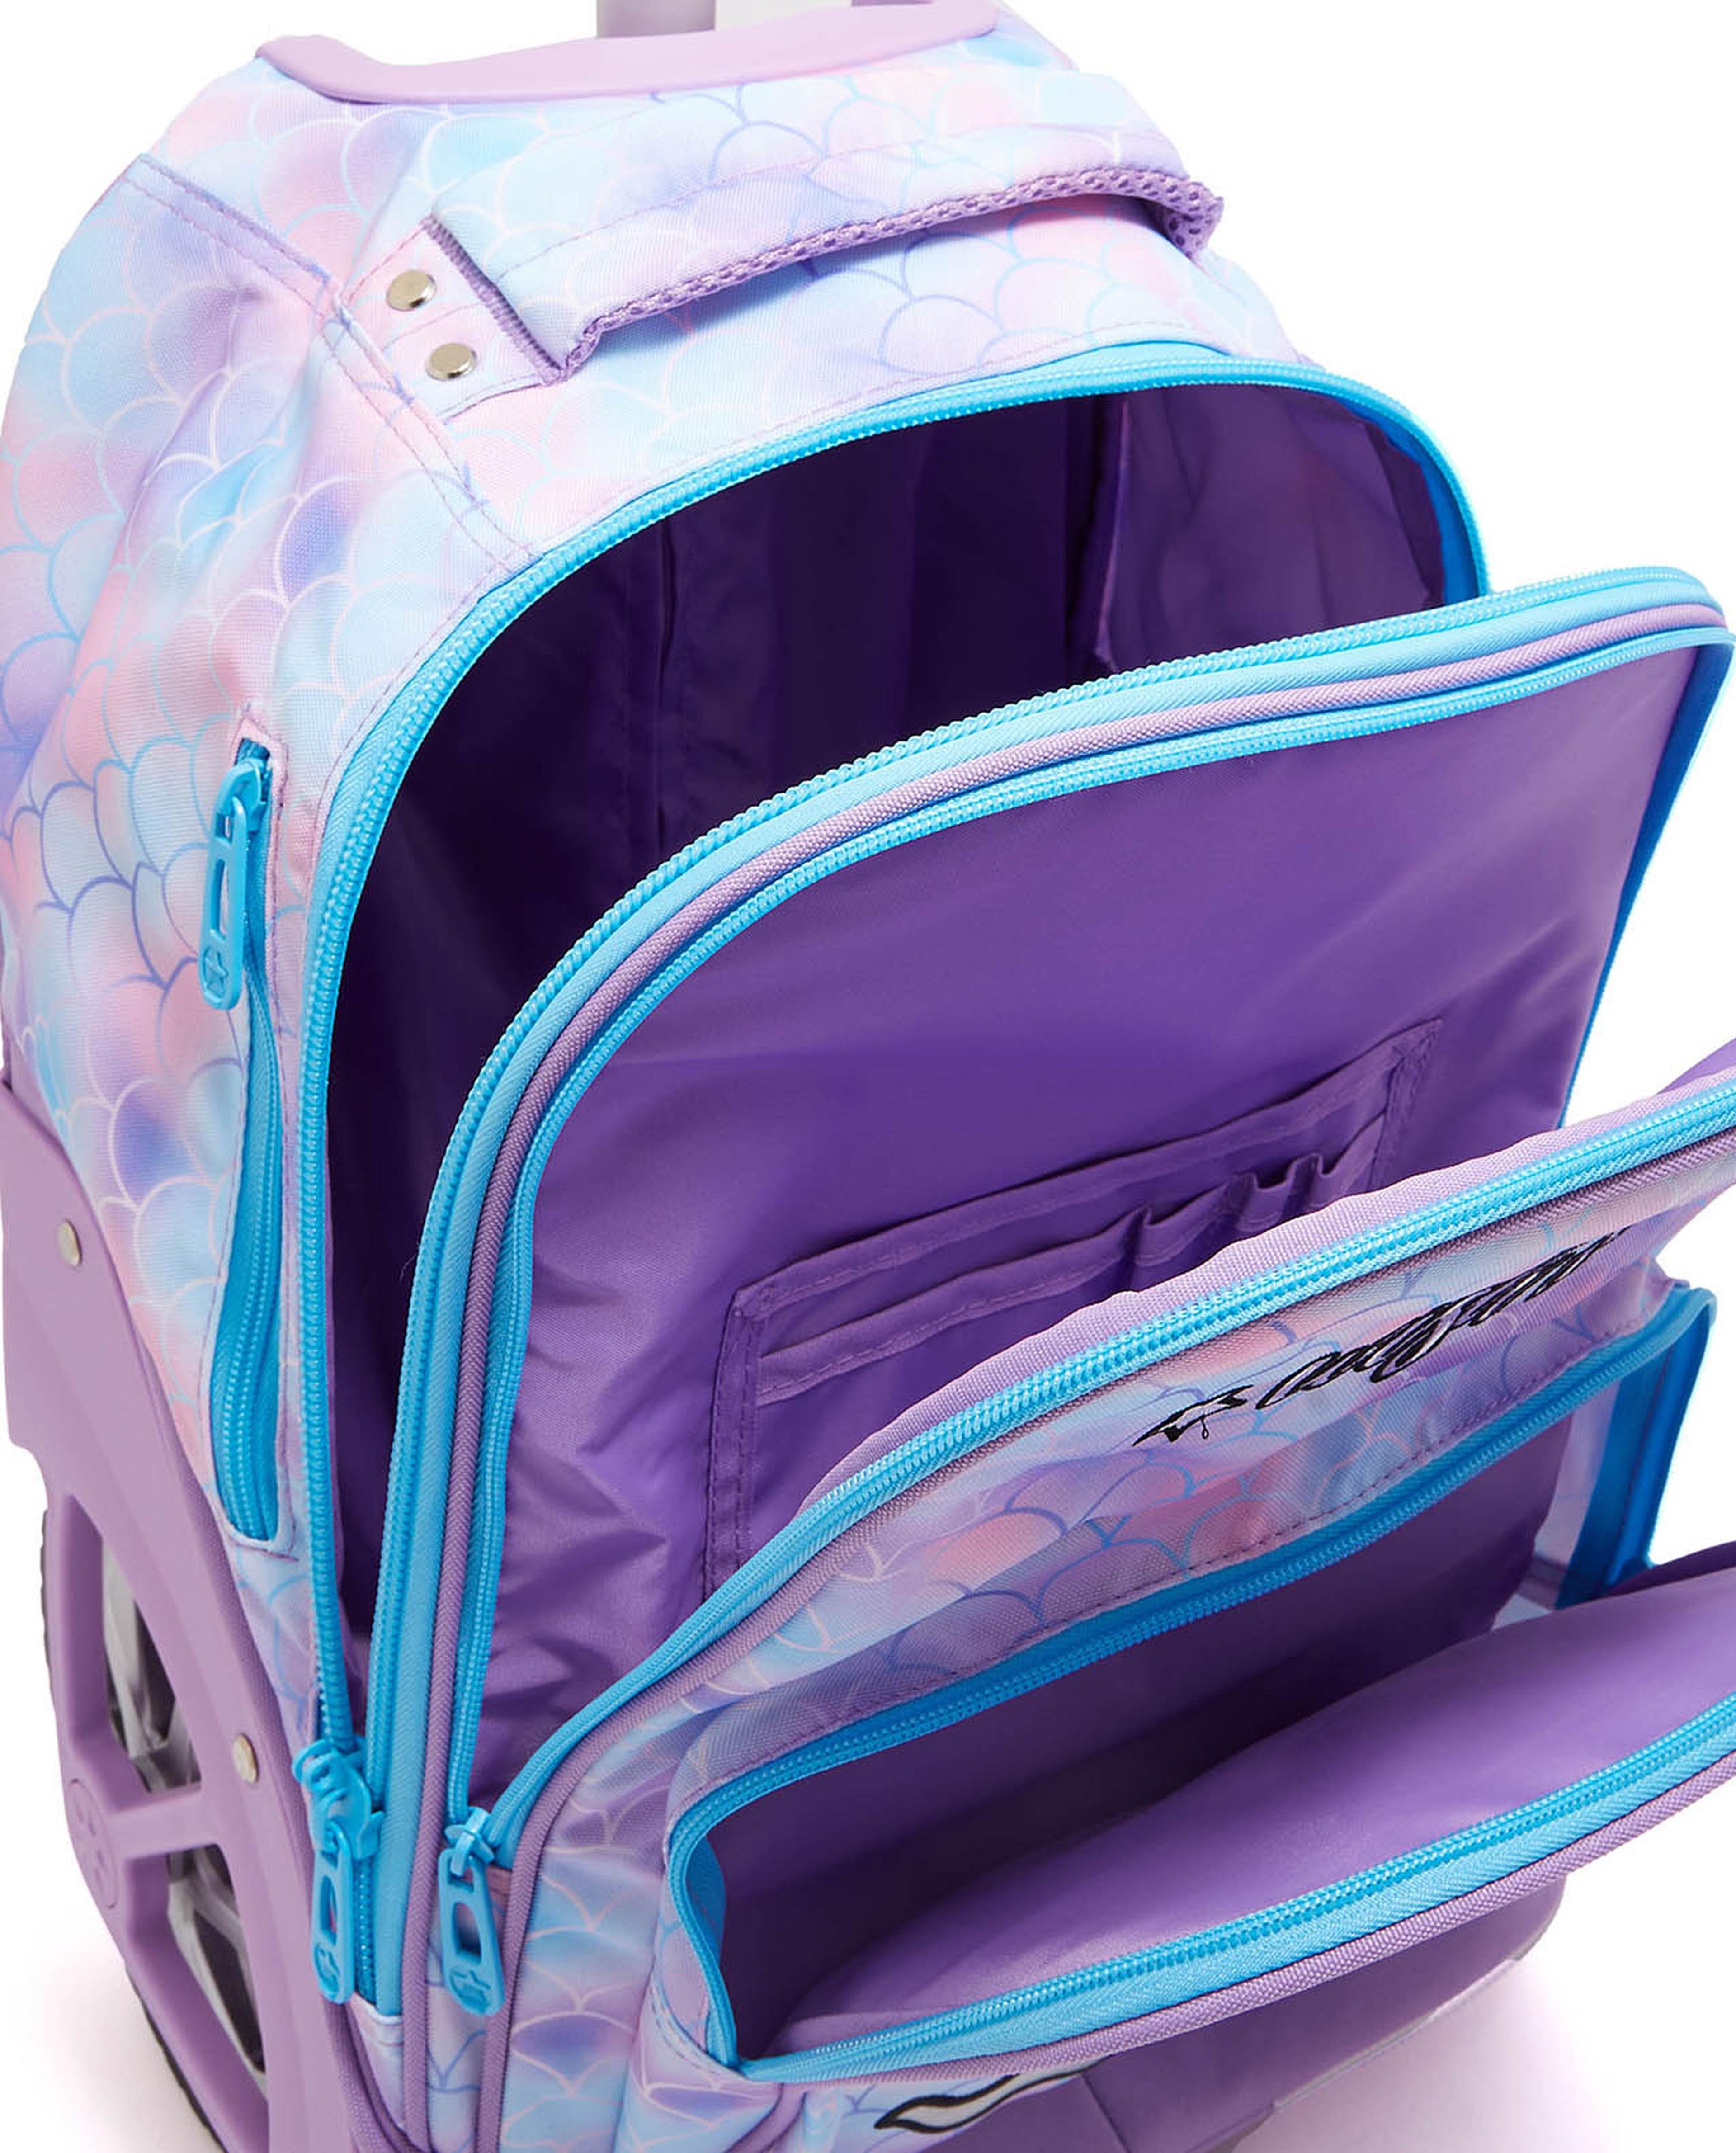 Printed Trolley Backpack with Pencil Case